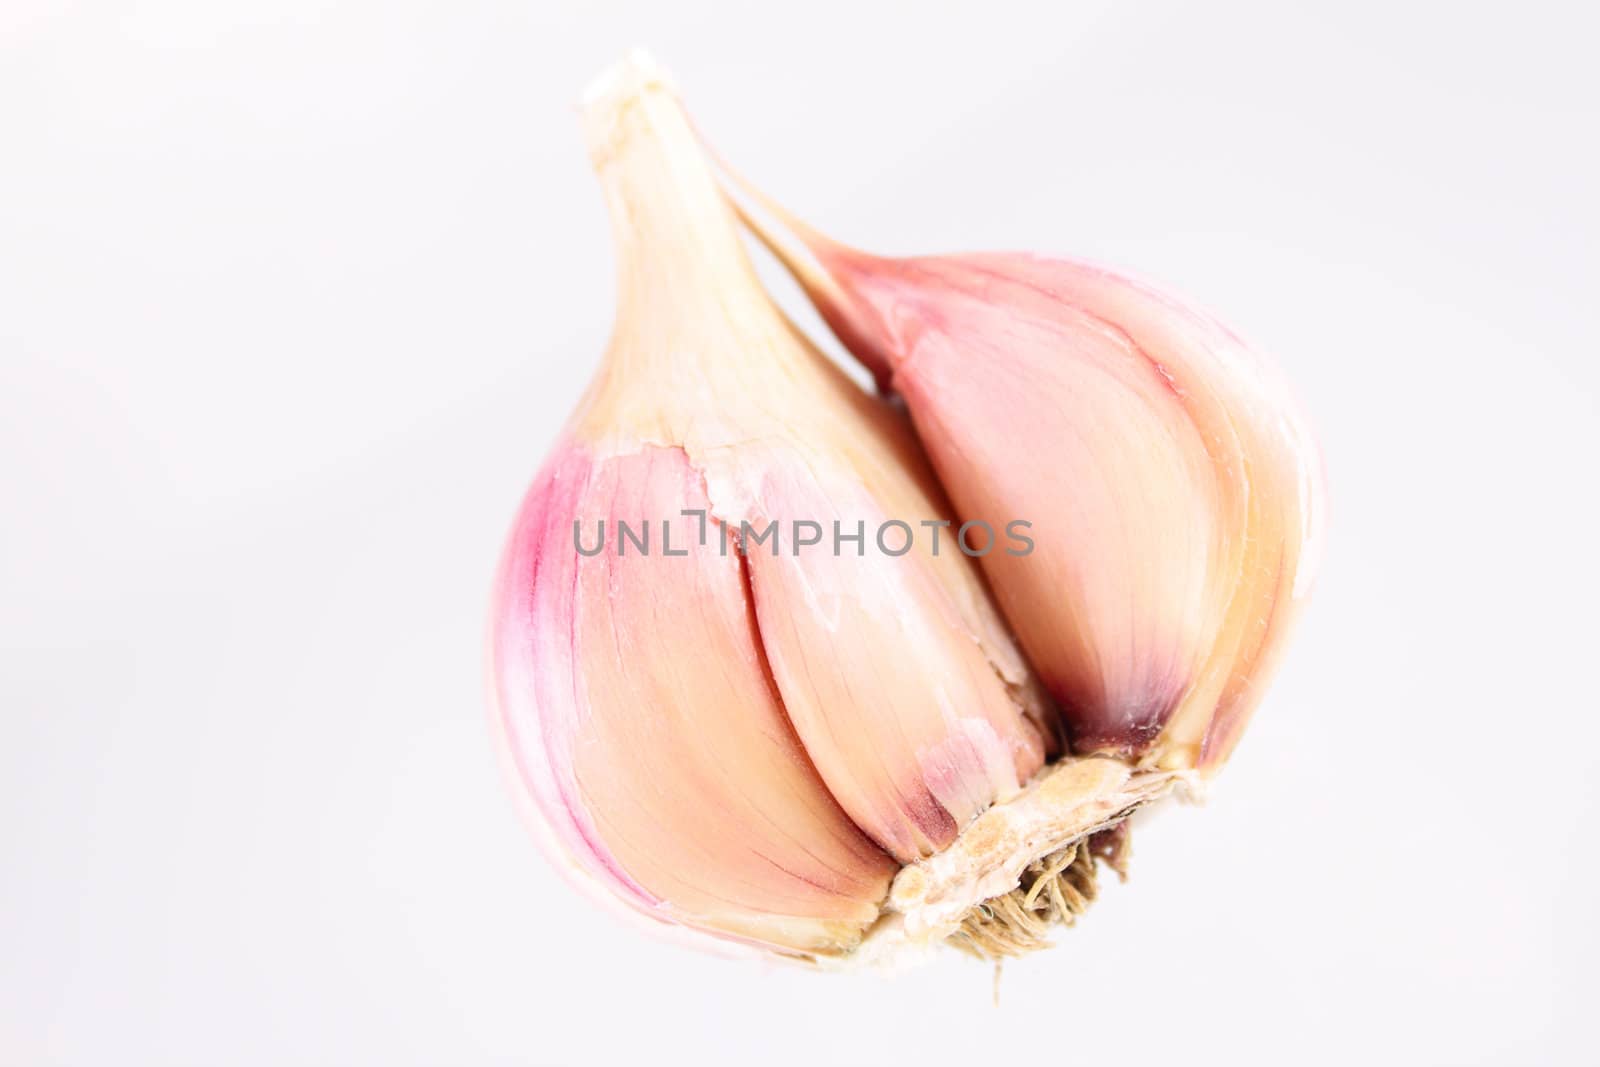 Garlick bulb removed close up on a white background without isolation